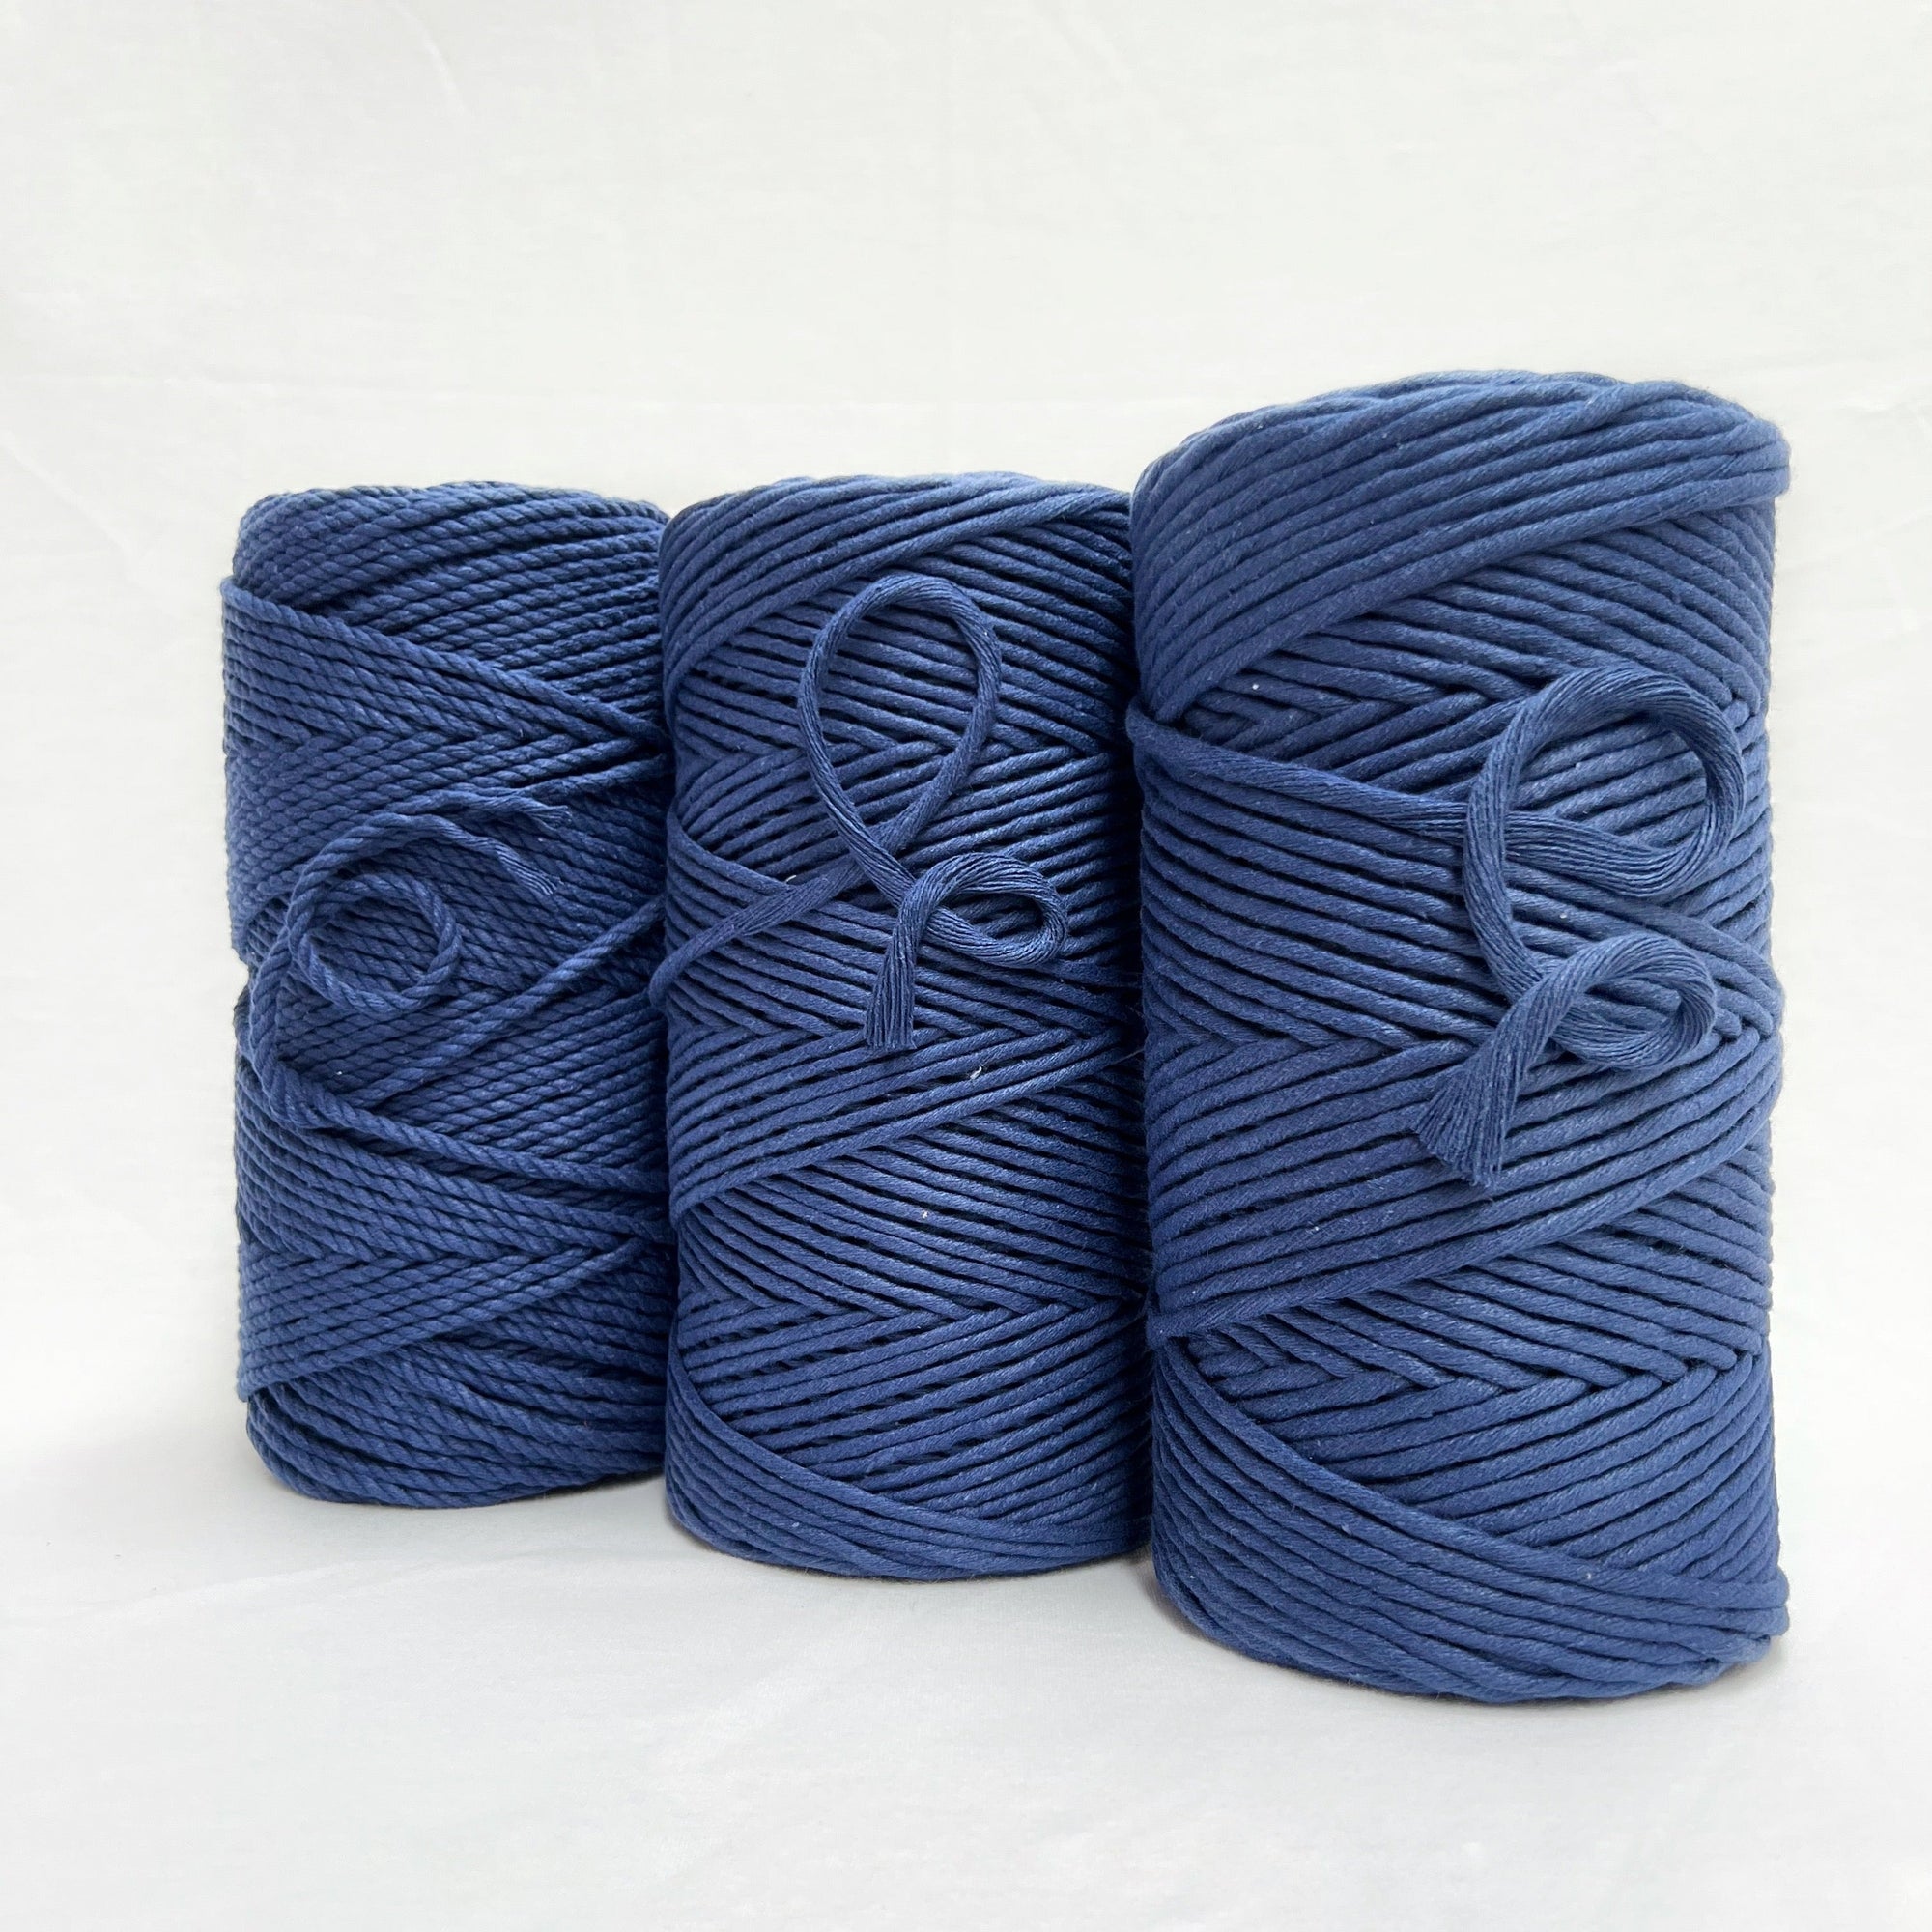 Mary Maker Studio Recycled Luxe Macrame String // Blue Depths macrame cotton macrame rope macrame workshop macrame patterns macrame